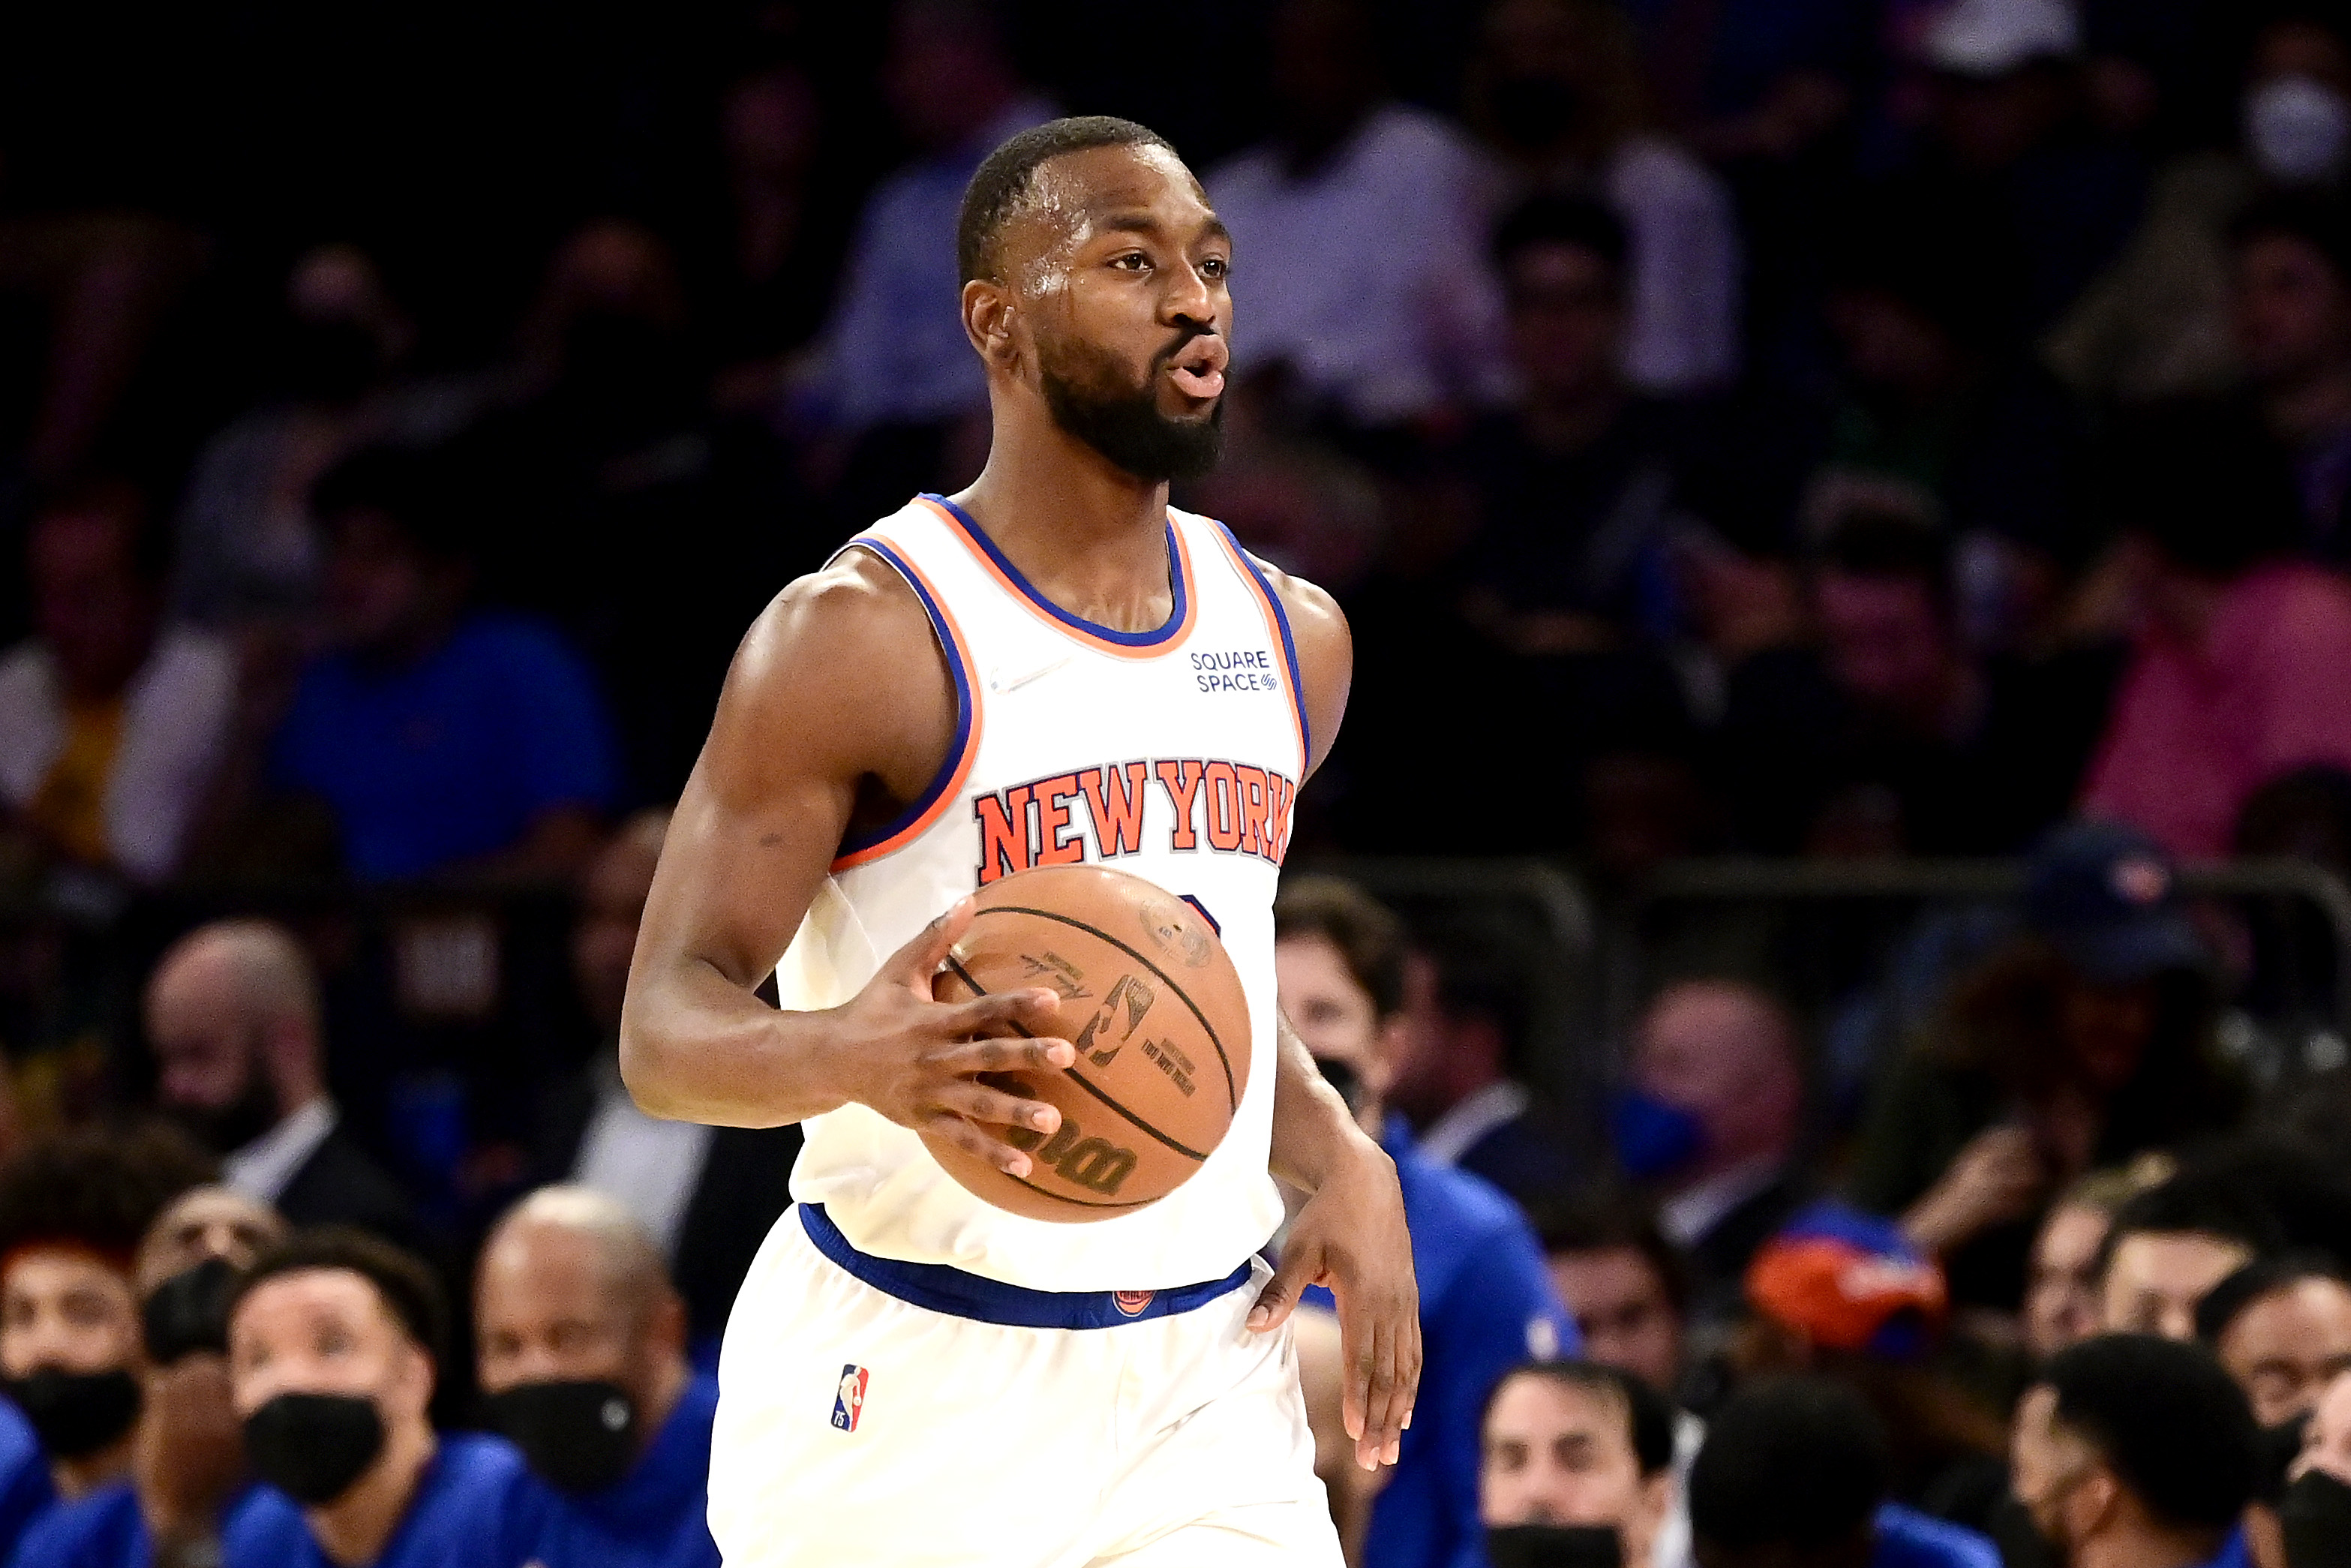 Kemba Walker dribbles the ball up the floor during a New York Knicks preseason game